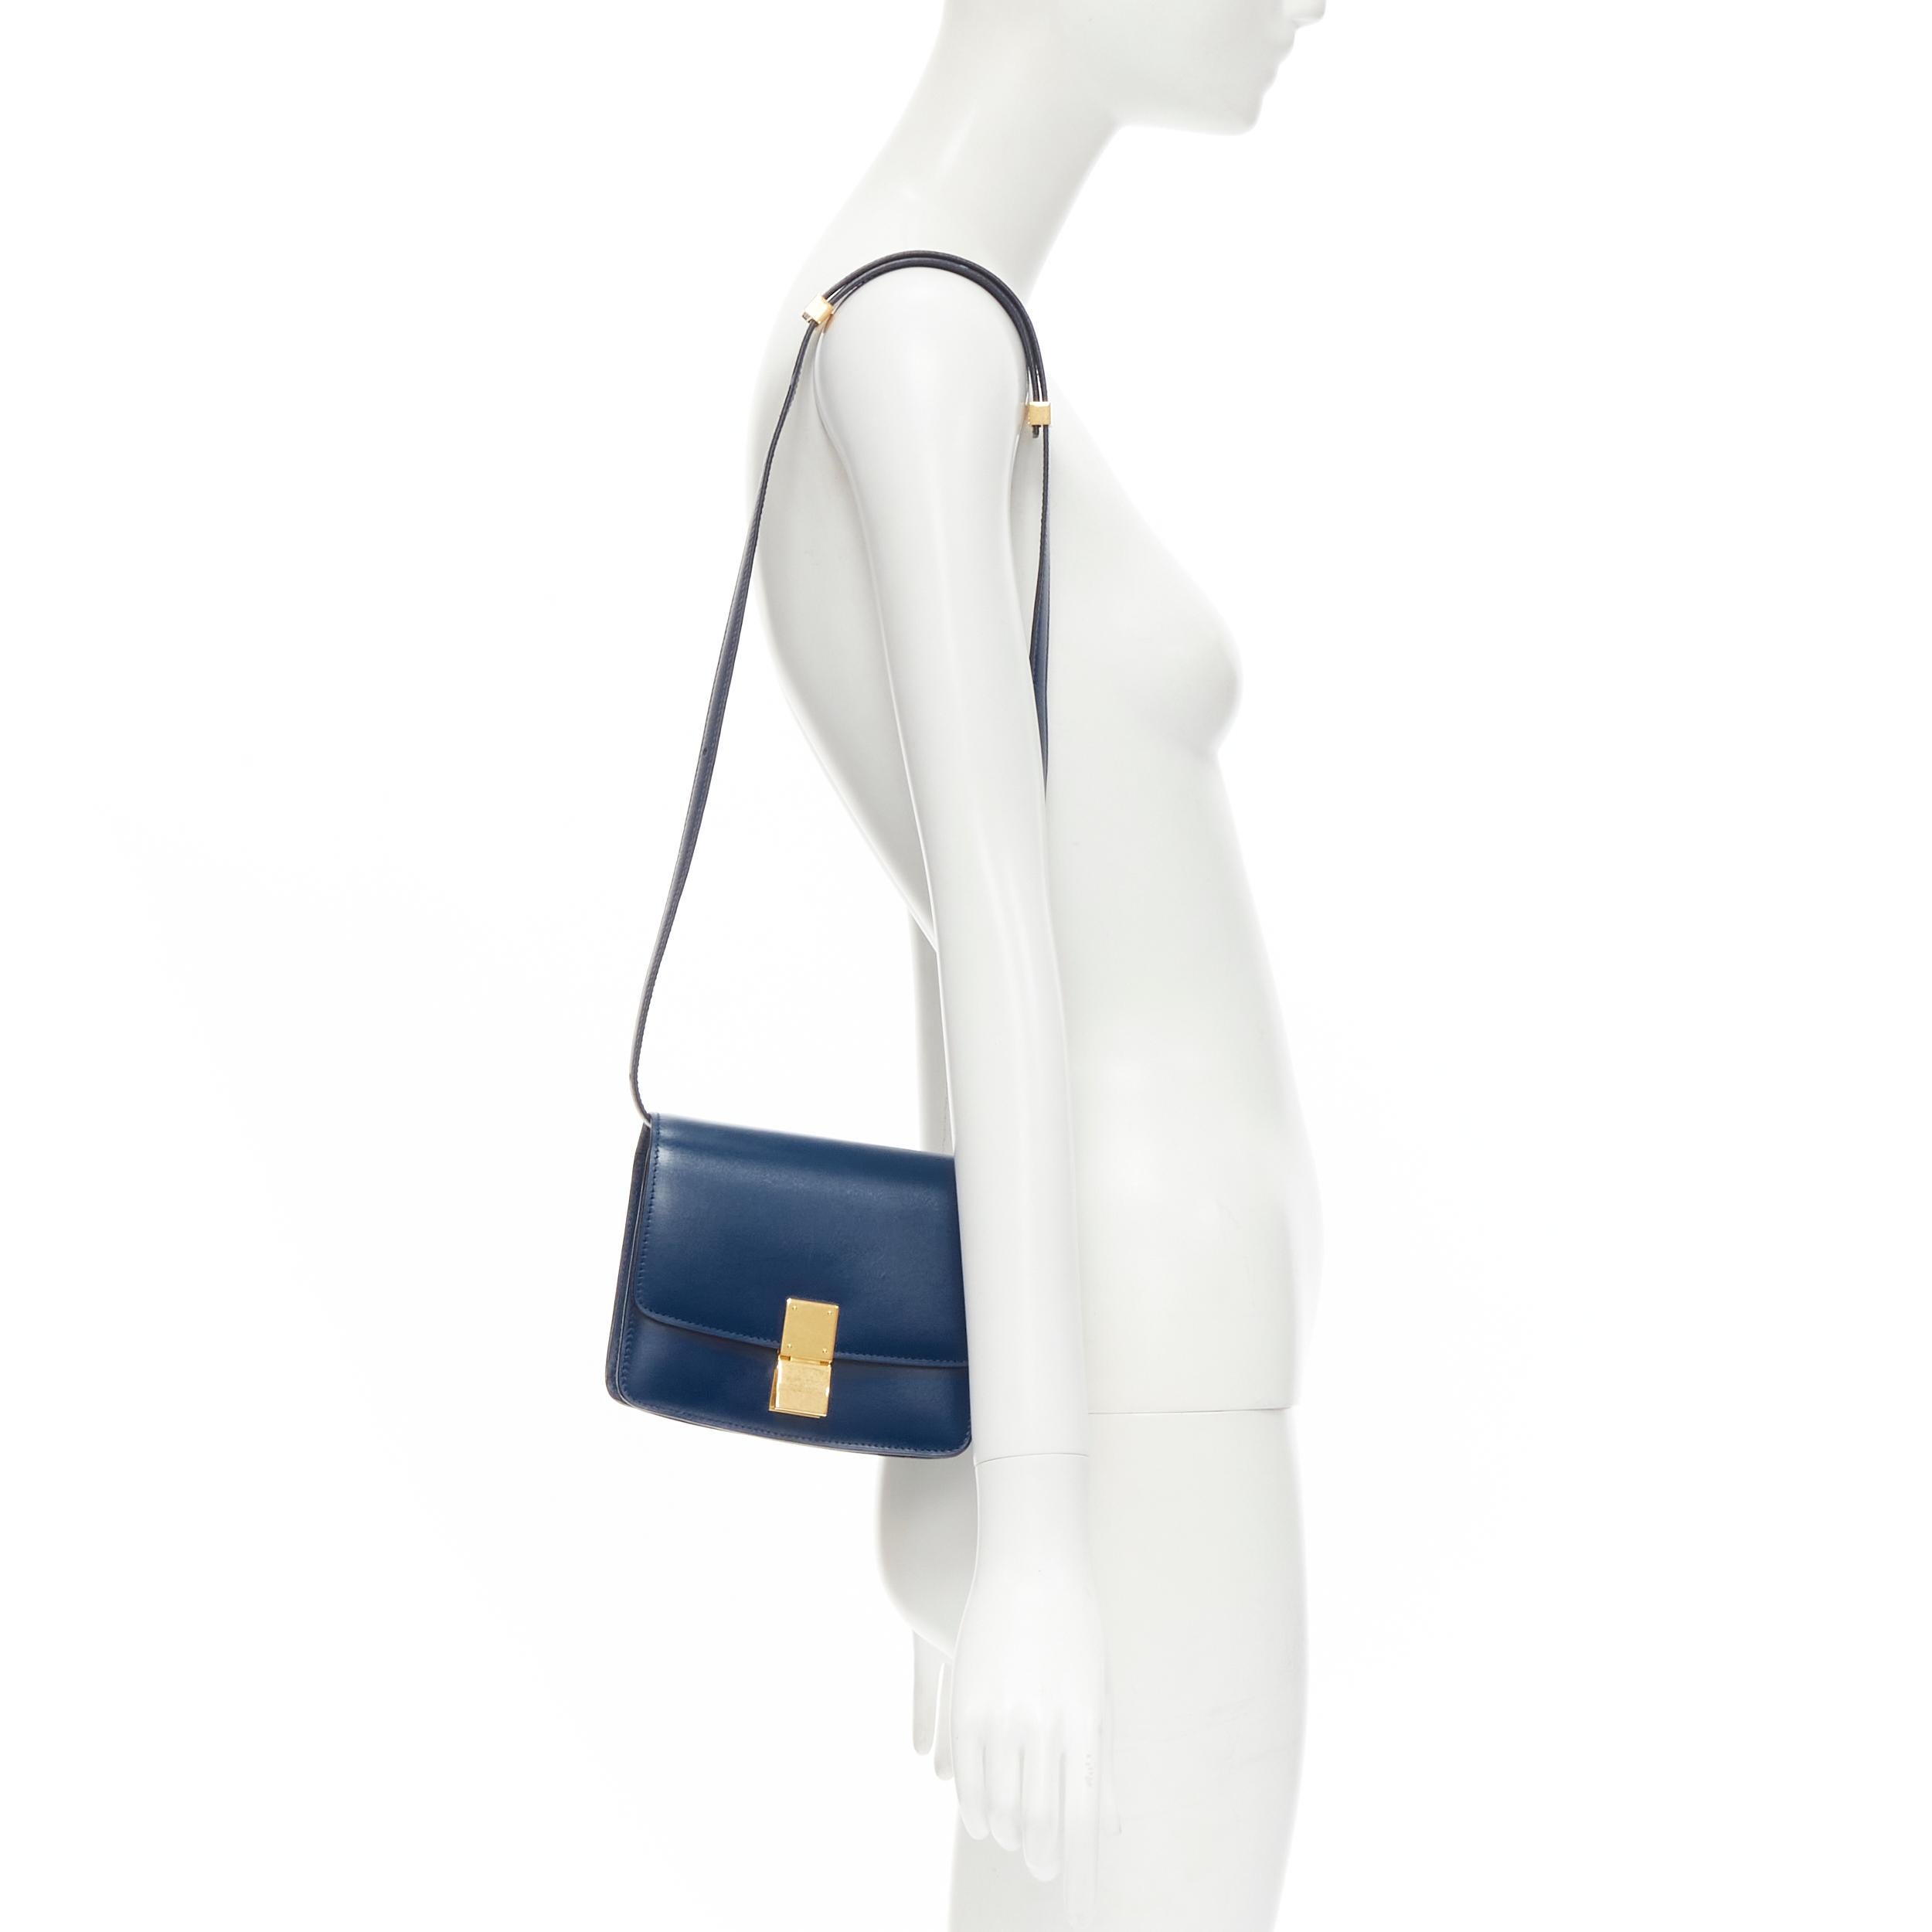 CELINE Mini Classic Box Amazone blue smooth lambskin crossbody flap bag 
Reference: LNKO/A01907 
Brand: Celine 
Designer: Phoebe Philo 
Model: Mini Classic 
Material: Leather 
Color: Blue 
Pattern: Solid 
Closure: Clasp 
Extra Detail: Amazone blue